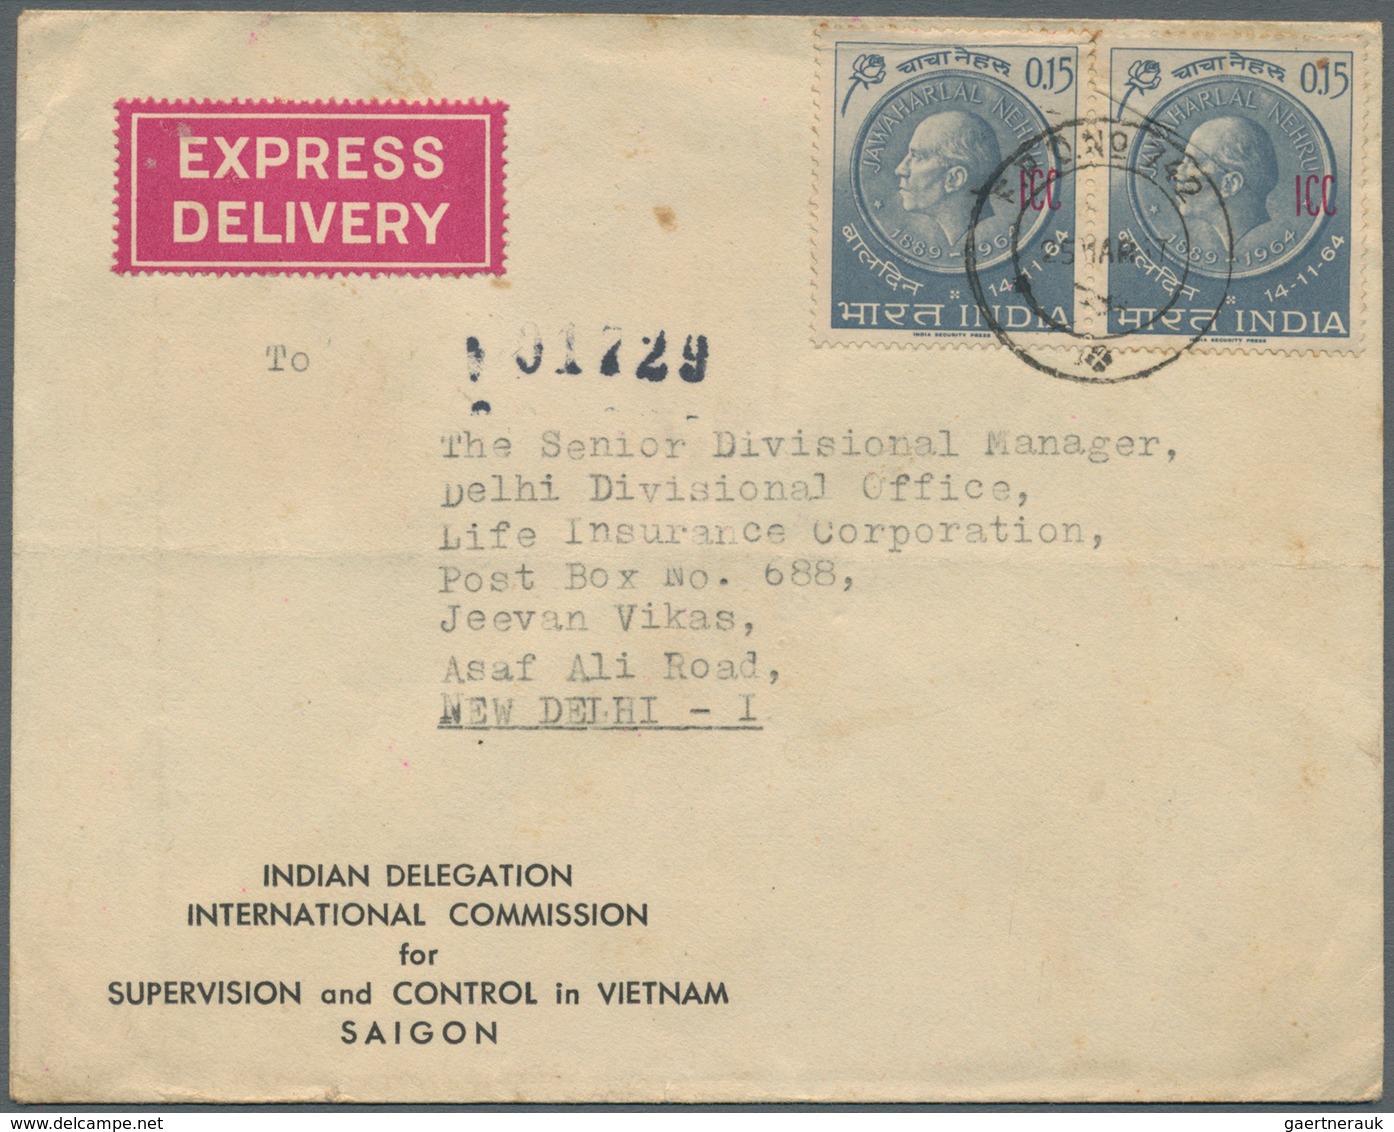 22744 Indien - Feldpost: 1954-1968: Group of 14 covers from the Indian Custodian Forces, the Intern. Commi